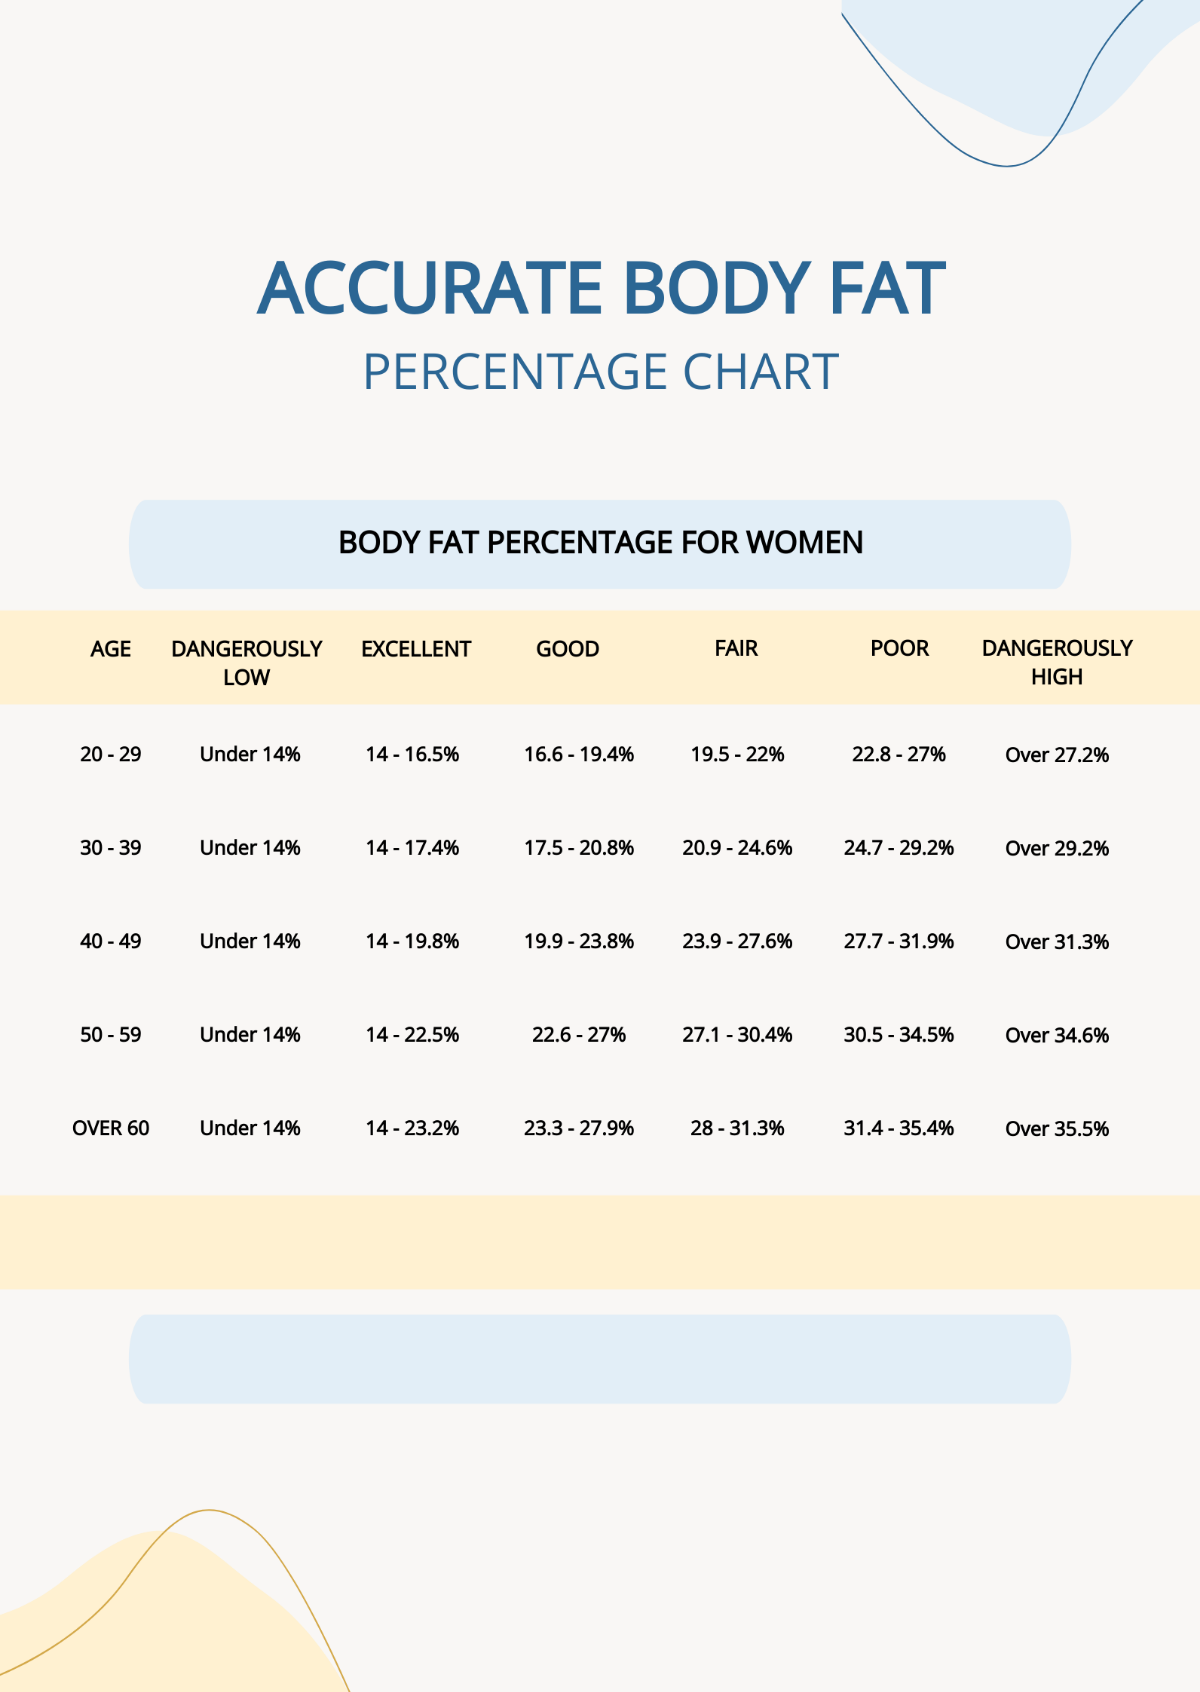 Accurate Body Fat Percentage Chart Template